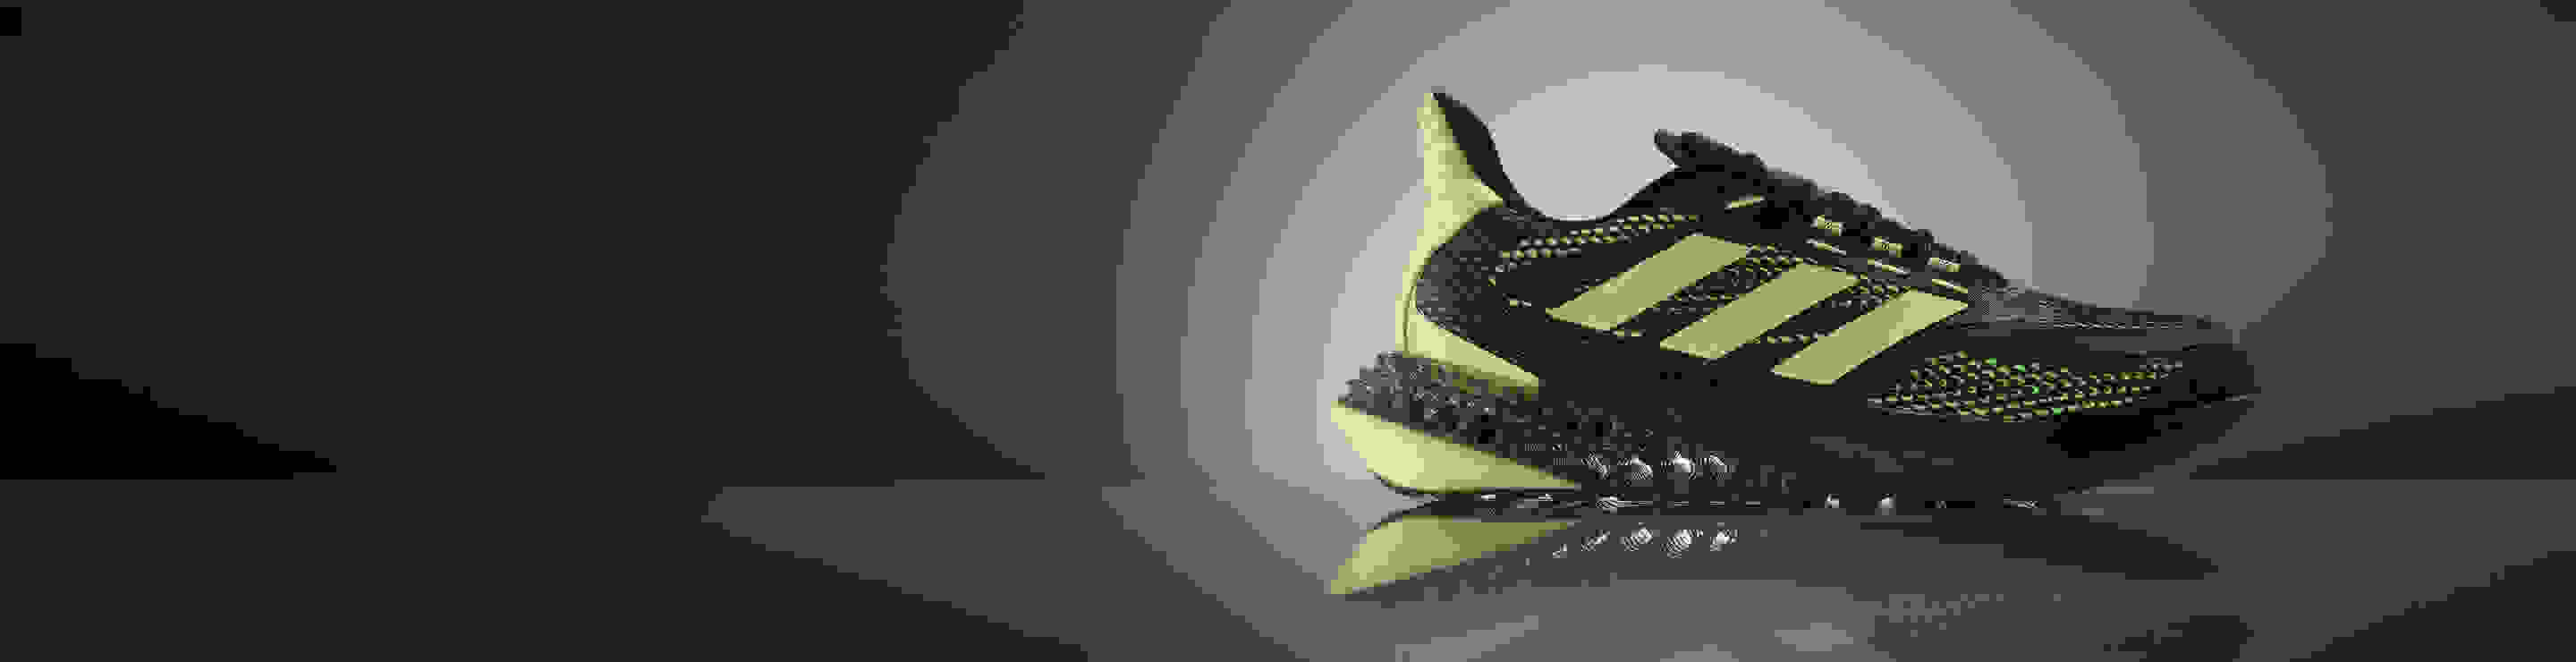 Video explaining the design and technology behind the new adidas 4DFWD running shoe.